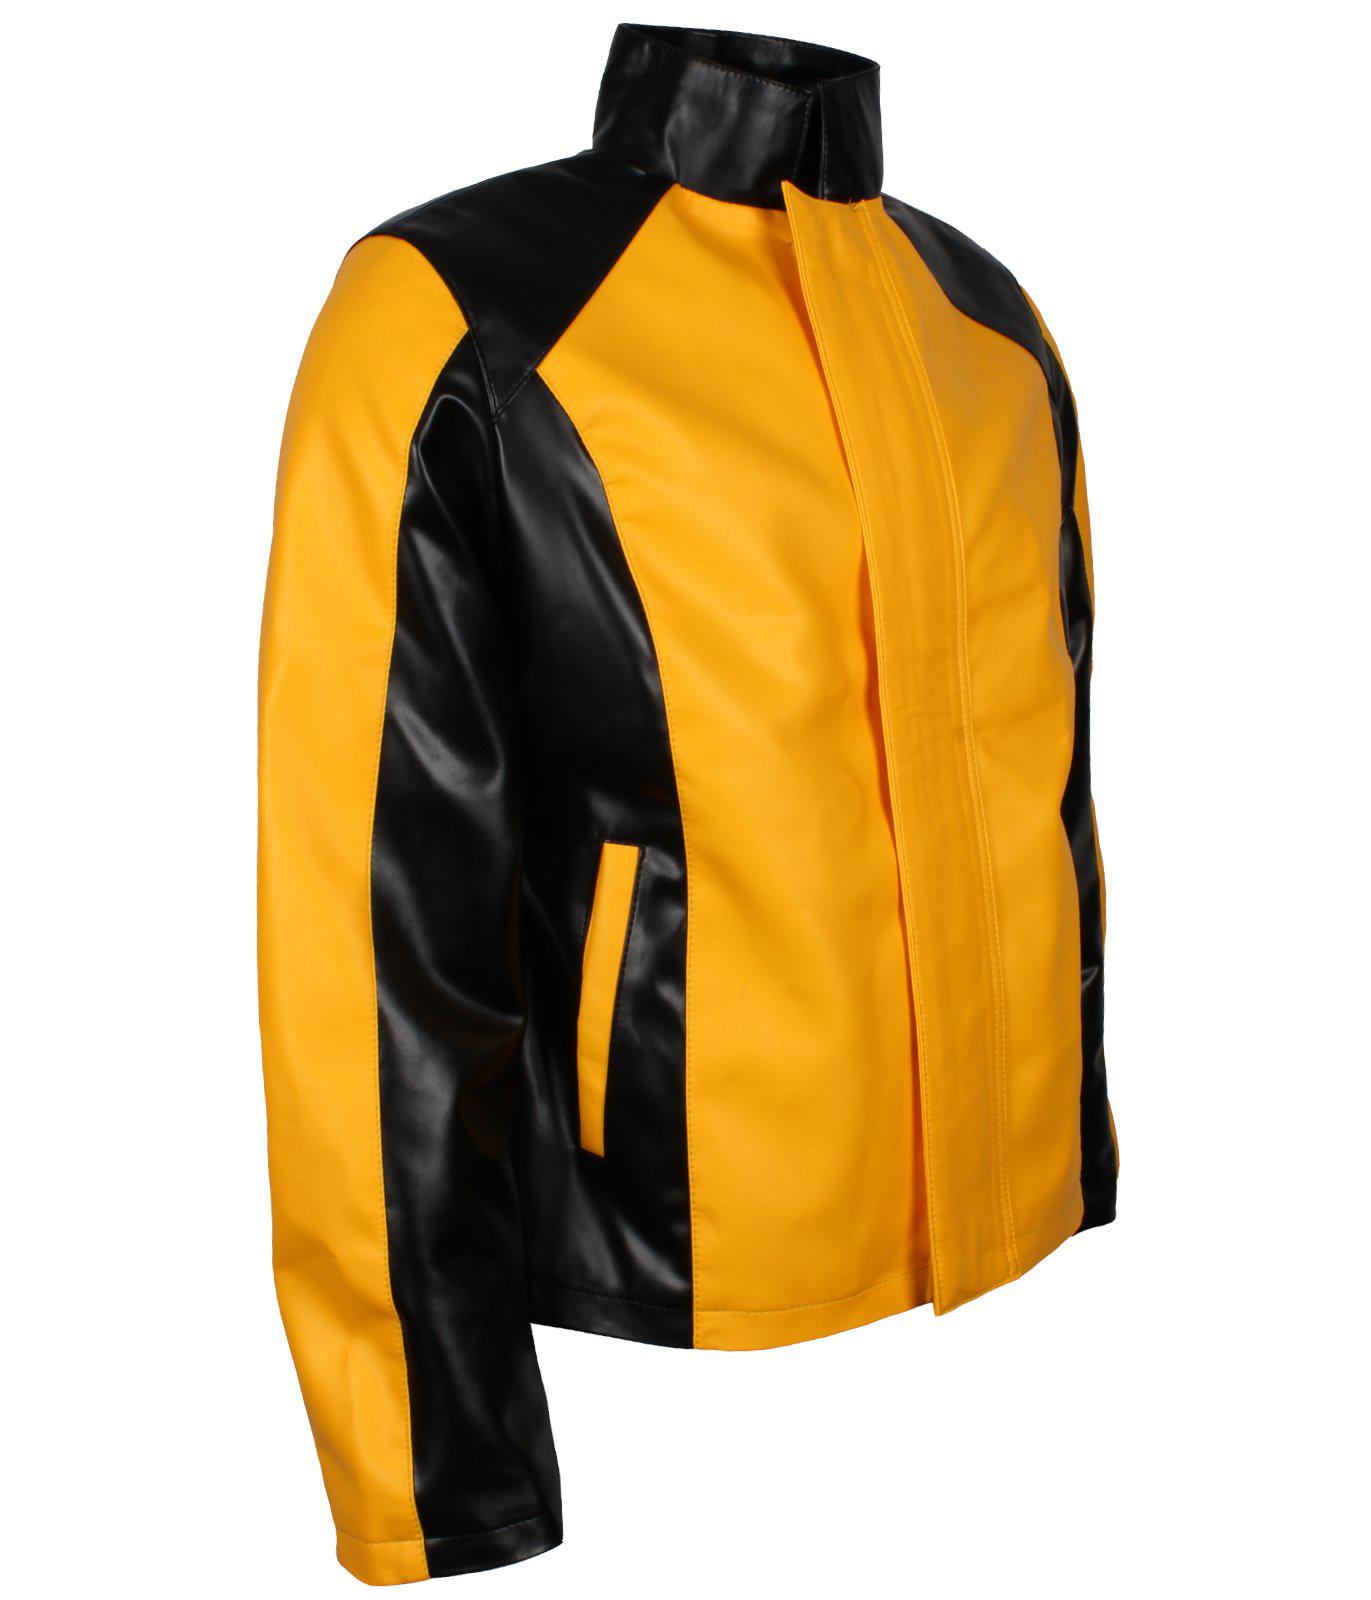 Infamous 2 Cole Macgrath Superhero Gaming Cosplay Costume Faux PU Black and Yellow  Leather Biker Jacket